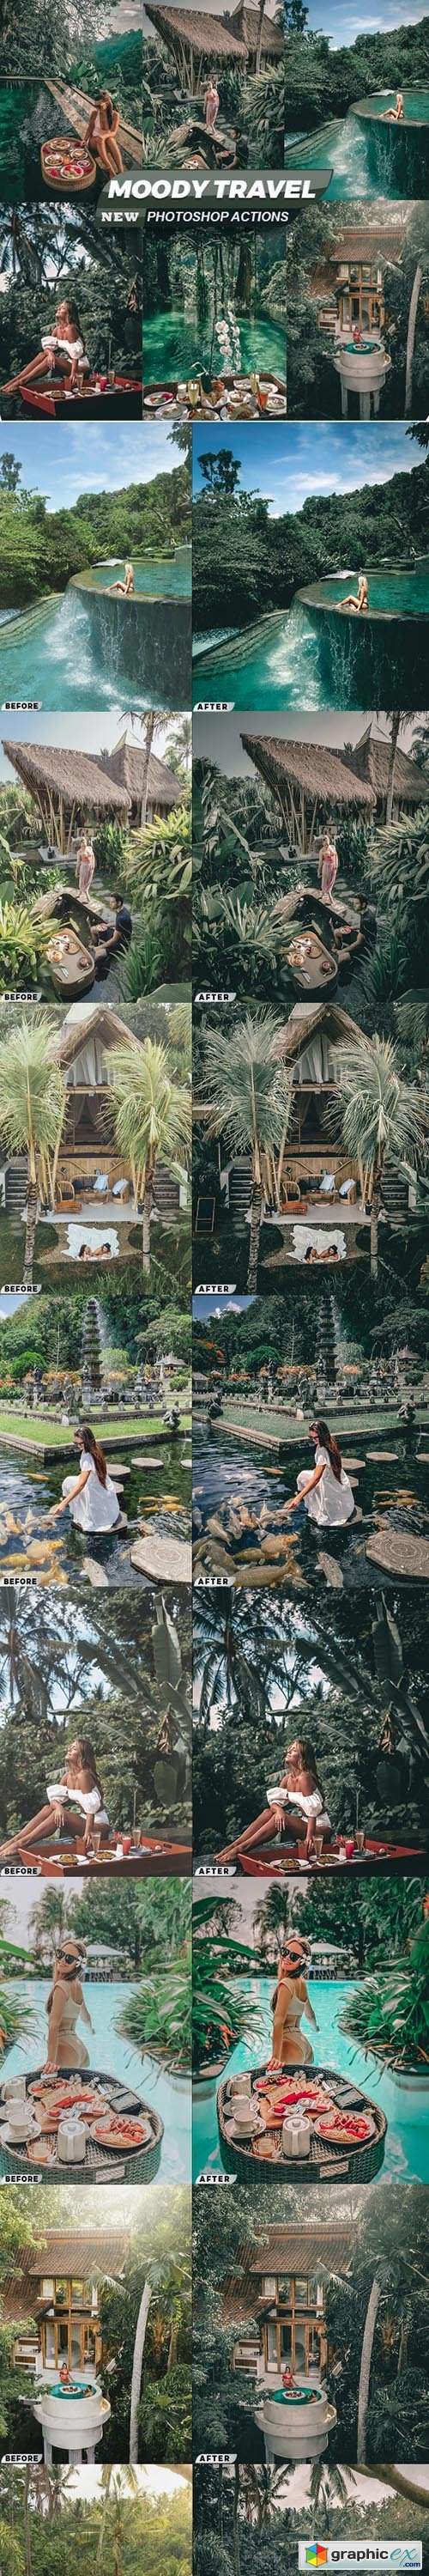 Moody Travel Blogger Photoshop Actions 